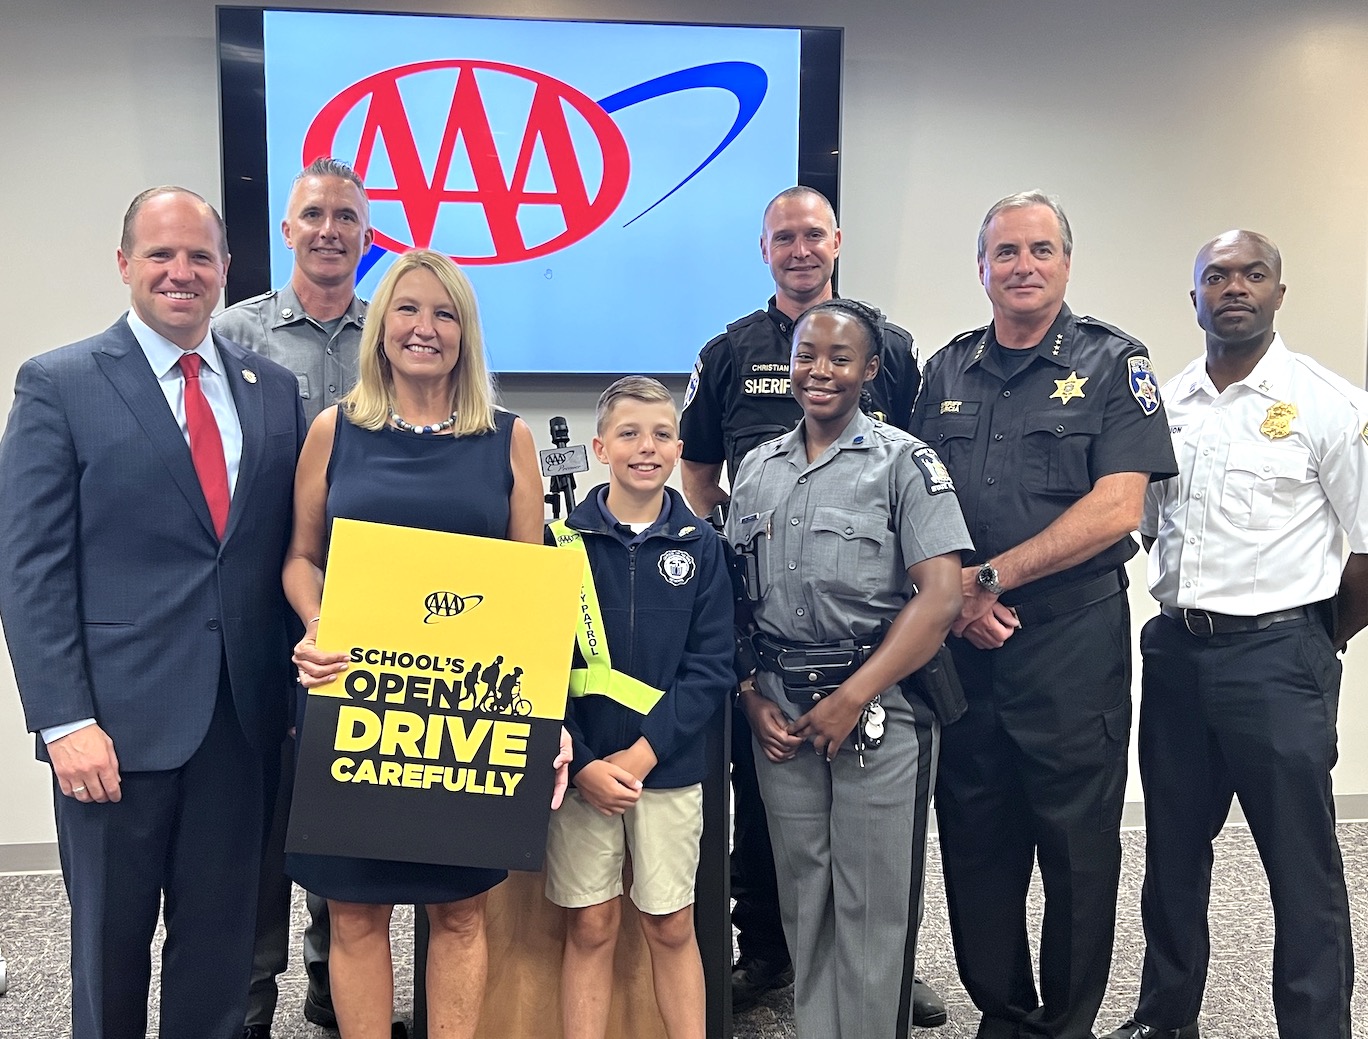 Local leaders joined with AAA and members of law enforcement to promote back-to-school safety. (AAA photo)